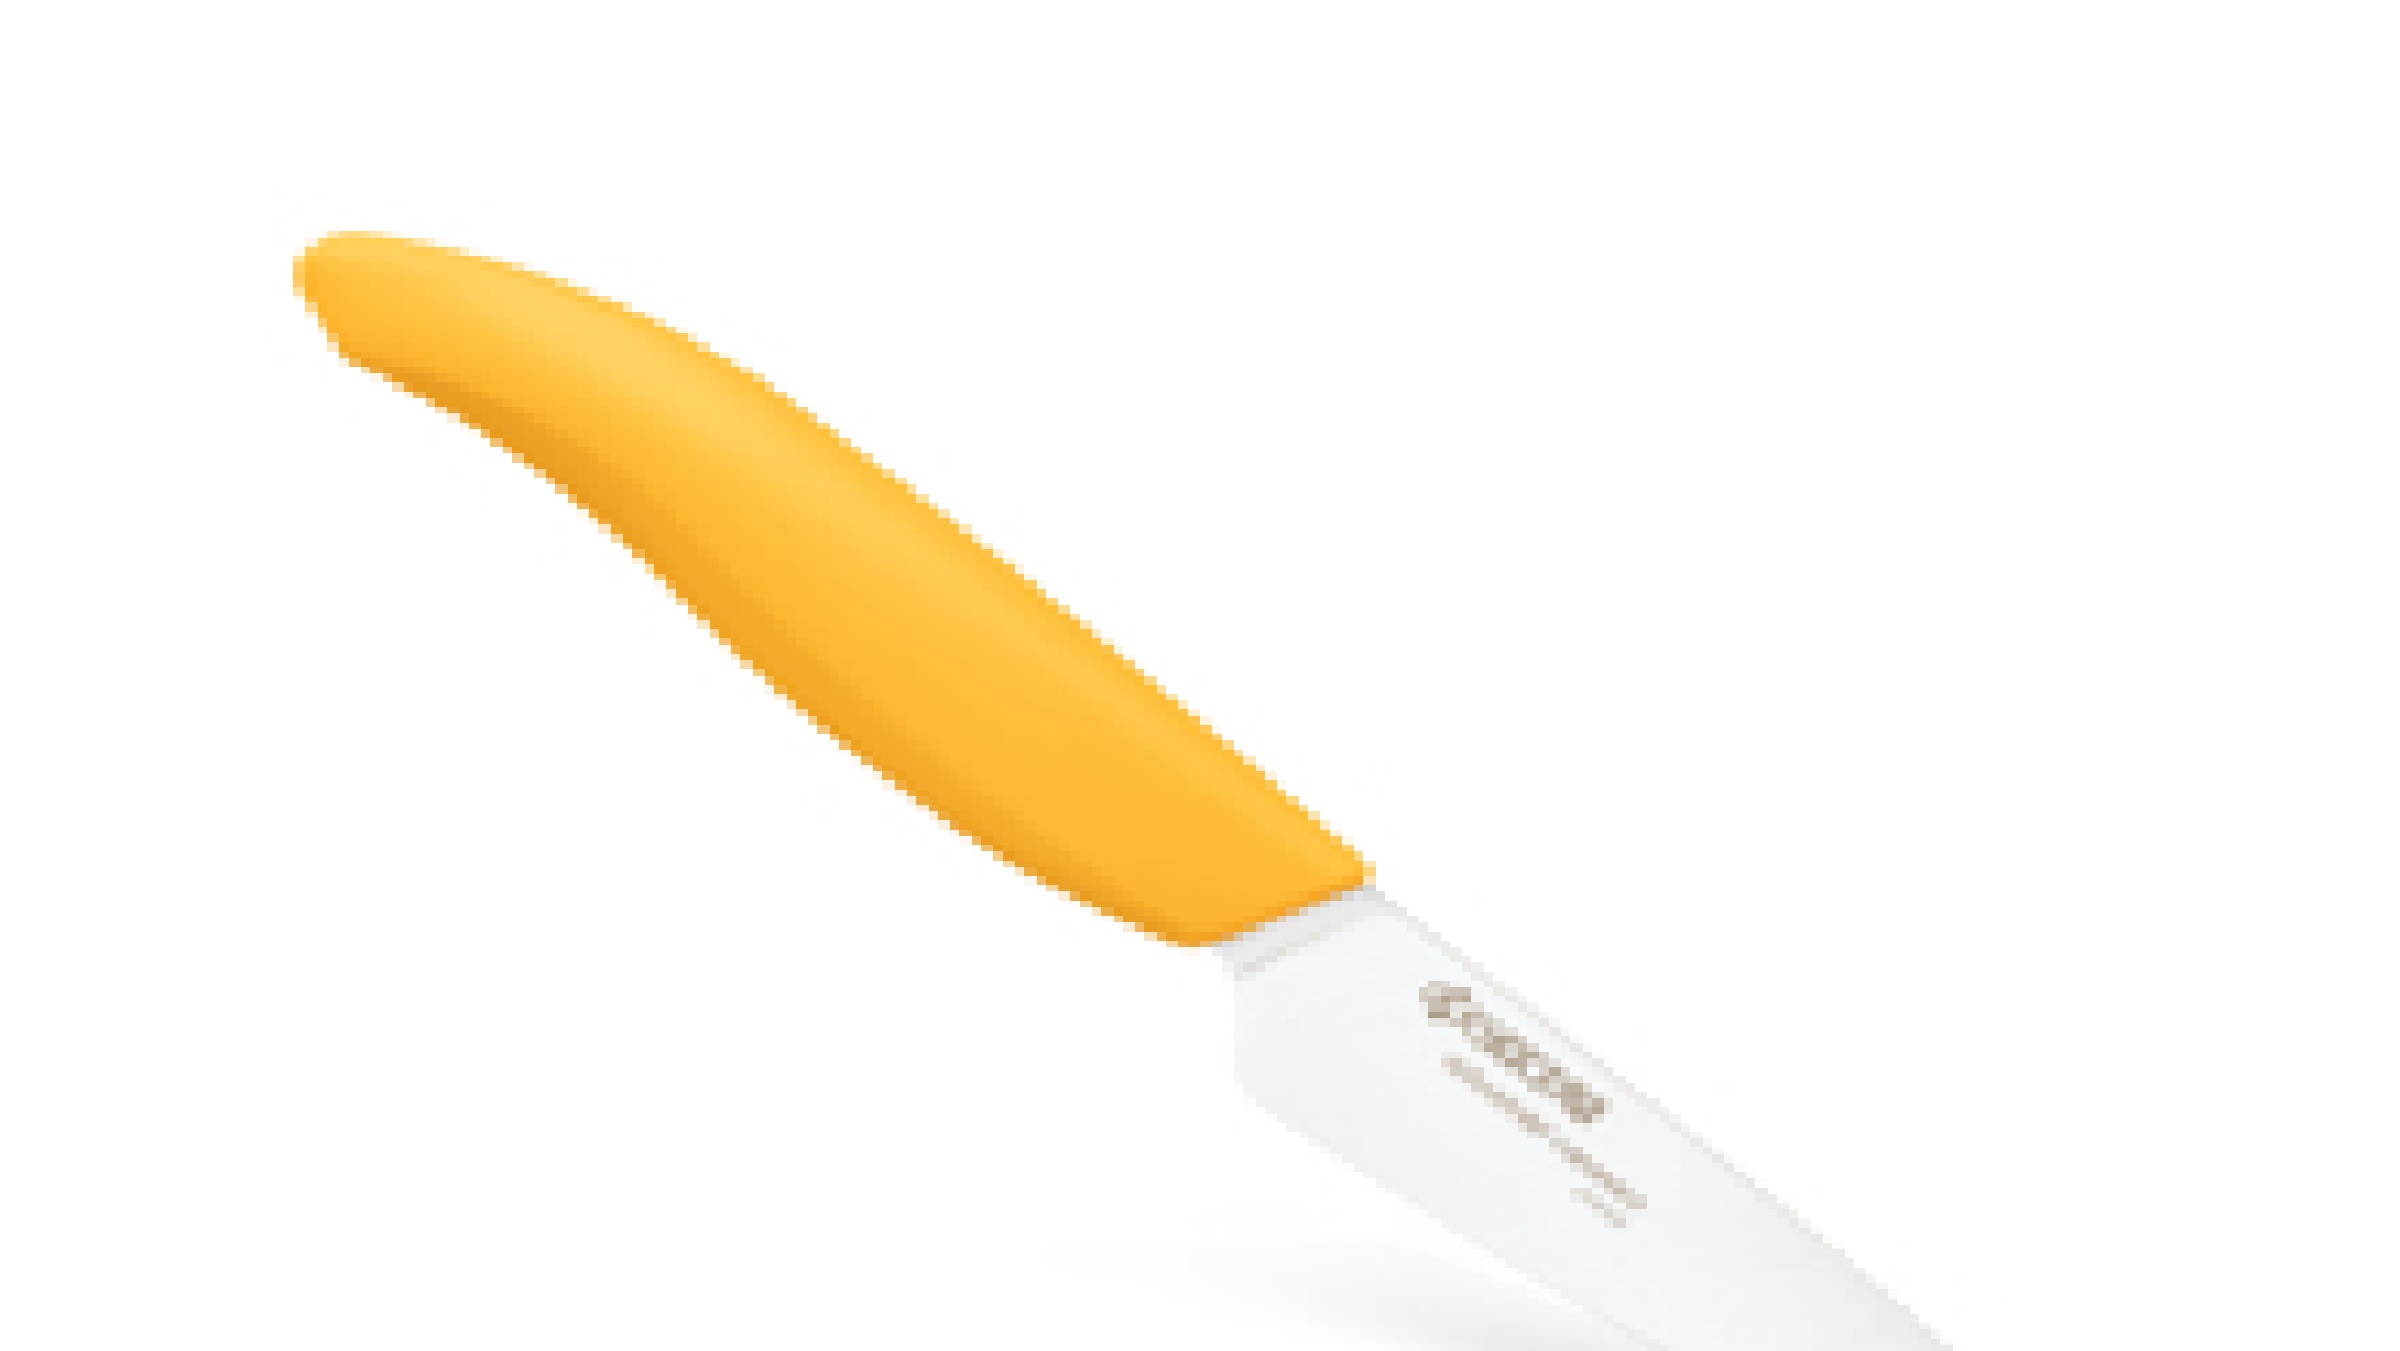 https://heimerdingercutlery.com/wp-content/uploads/2010/11/FK-075-WH-YL-Ceramic-Paring-Knife-3-IN-with-Yellow-Handle-by-Kyocera.jpg